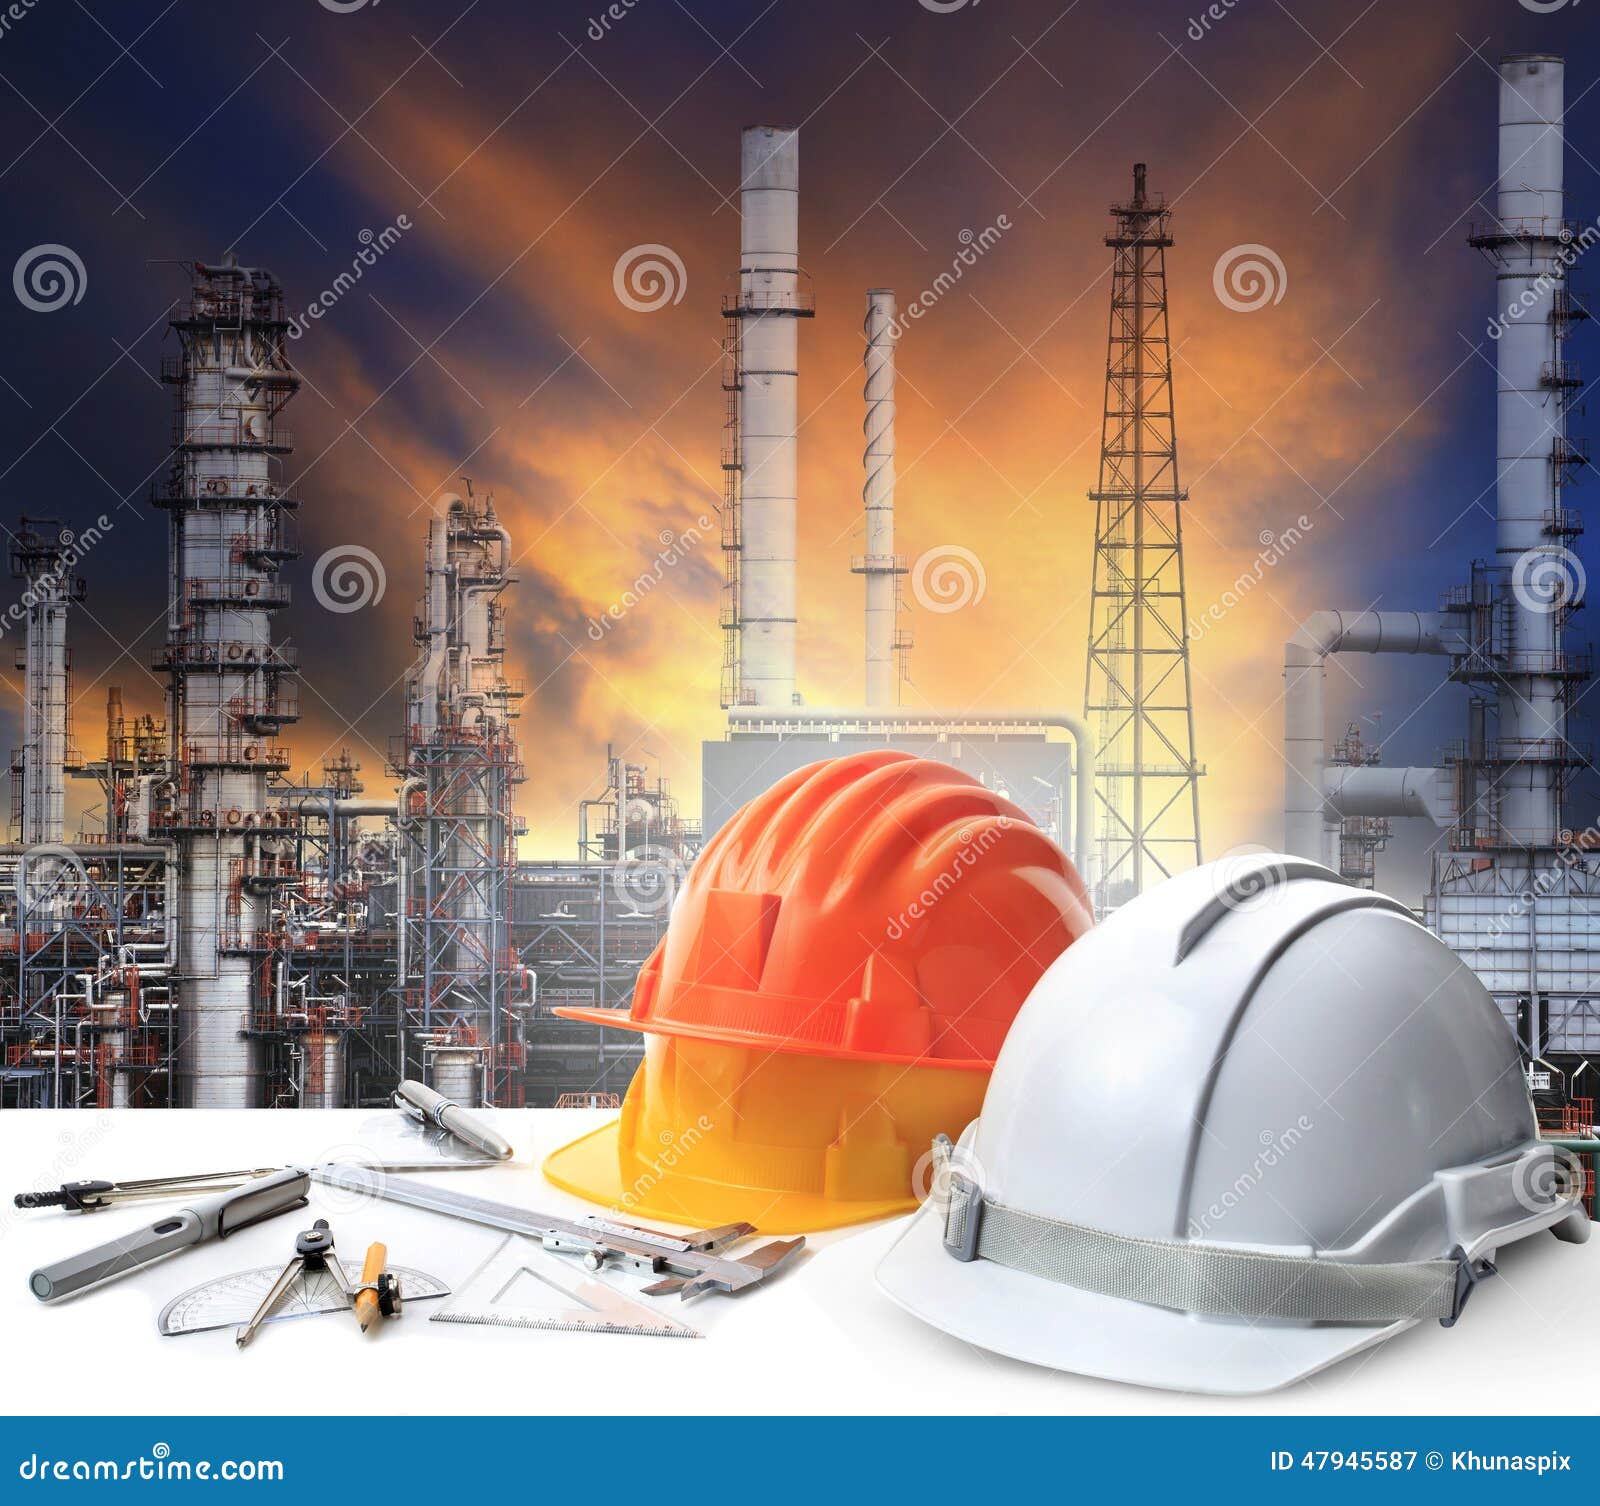 Engineer Working Table In Oil Refinery Plant Heavy Petrochemical Stock ...